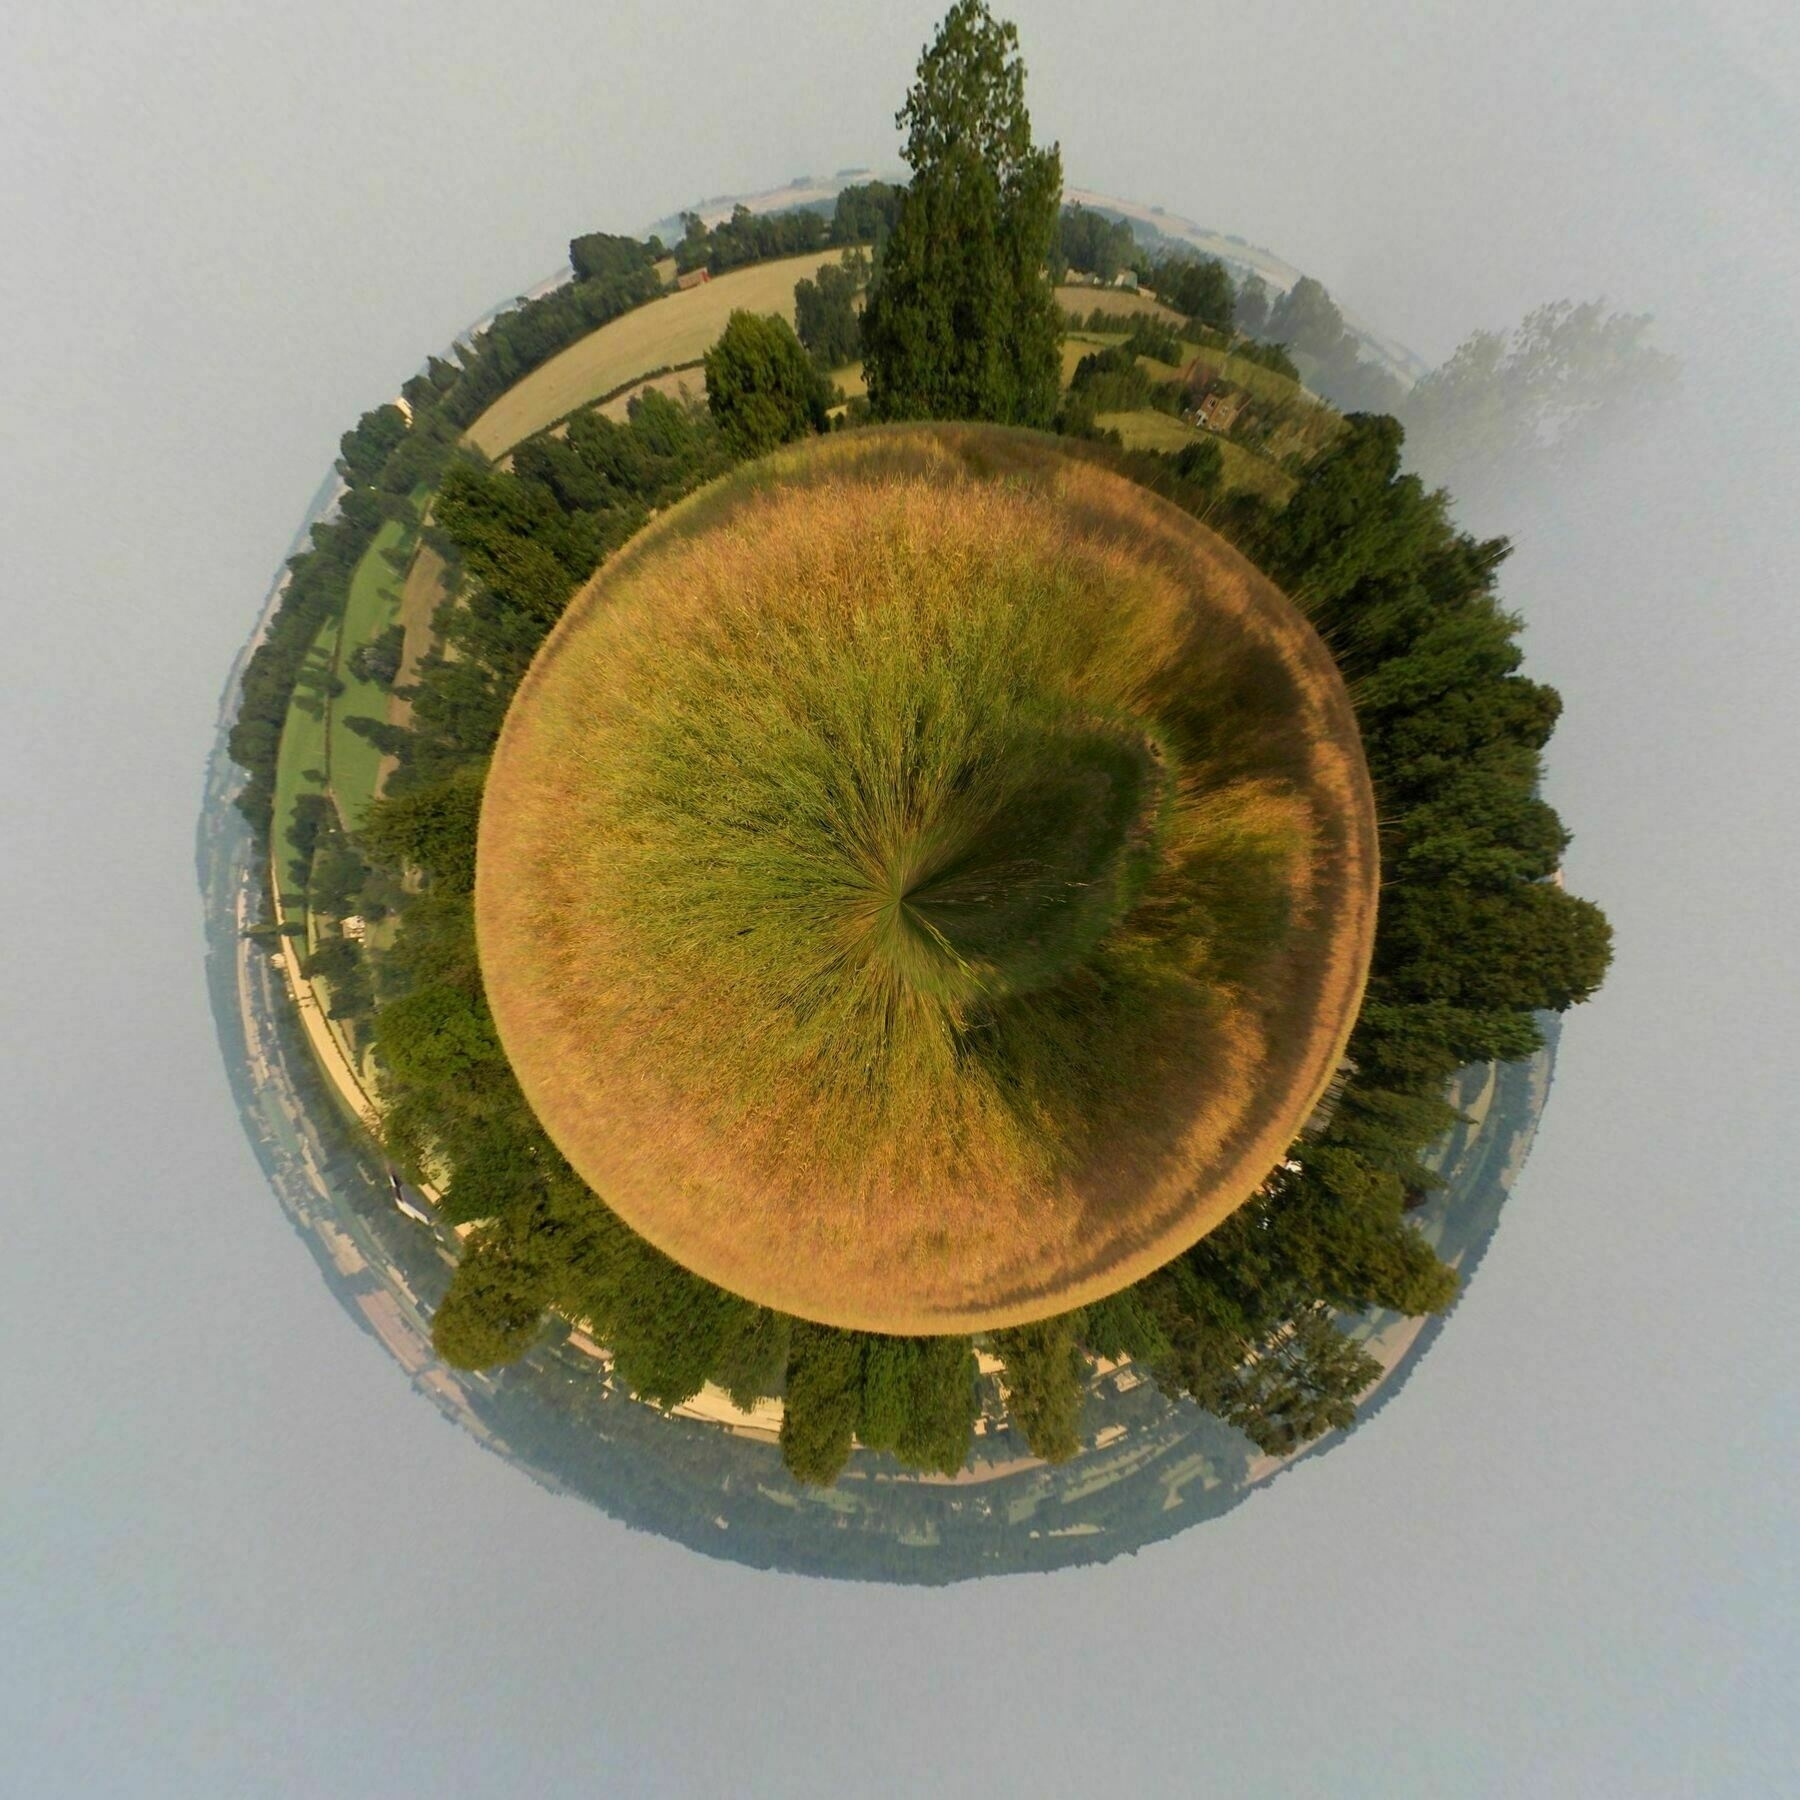 A panoramic view of fields and trees distorted into a globe